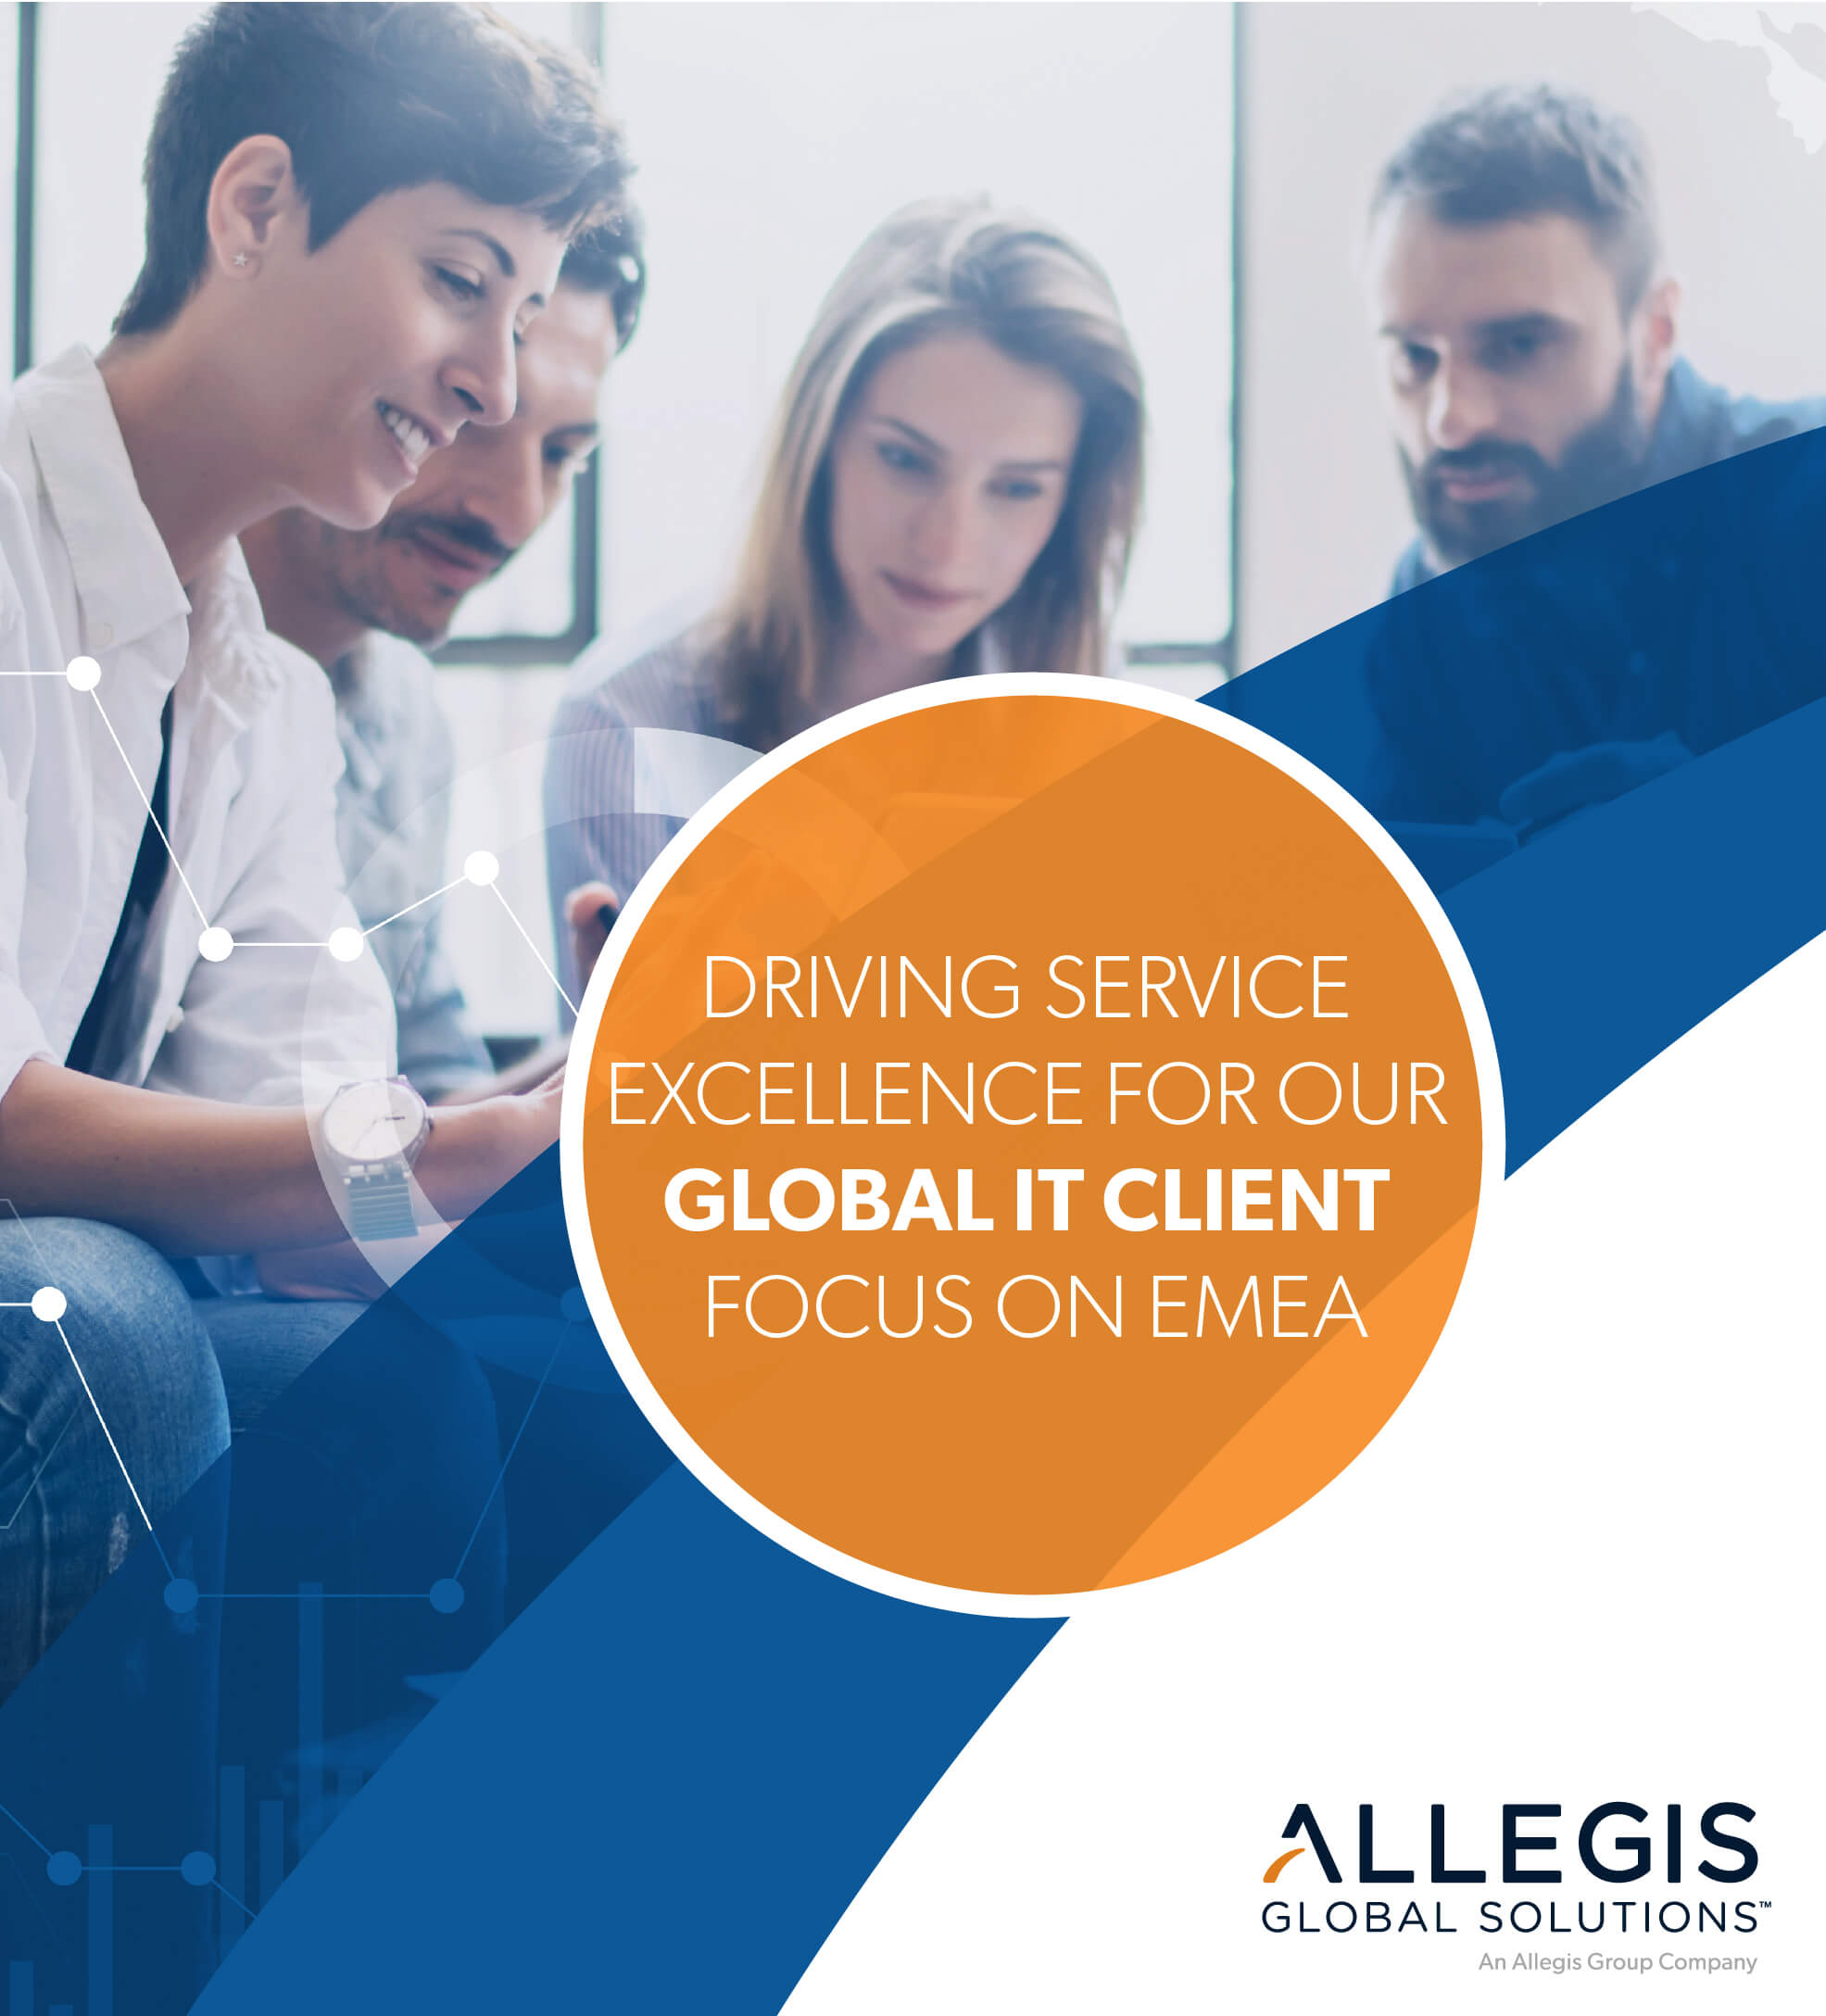 Driving Service Excellence For Our Global It Client Focus On Emea